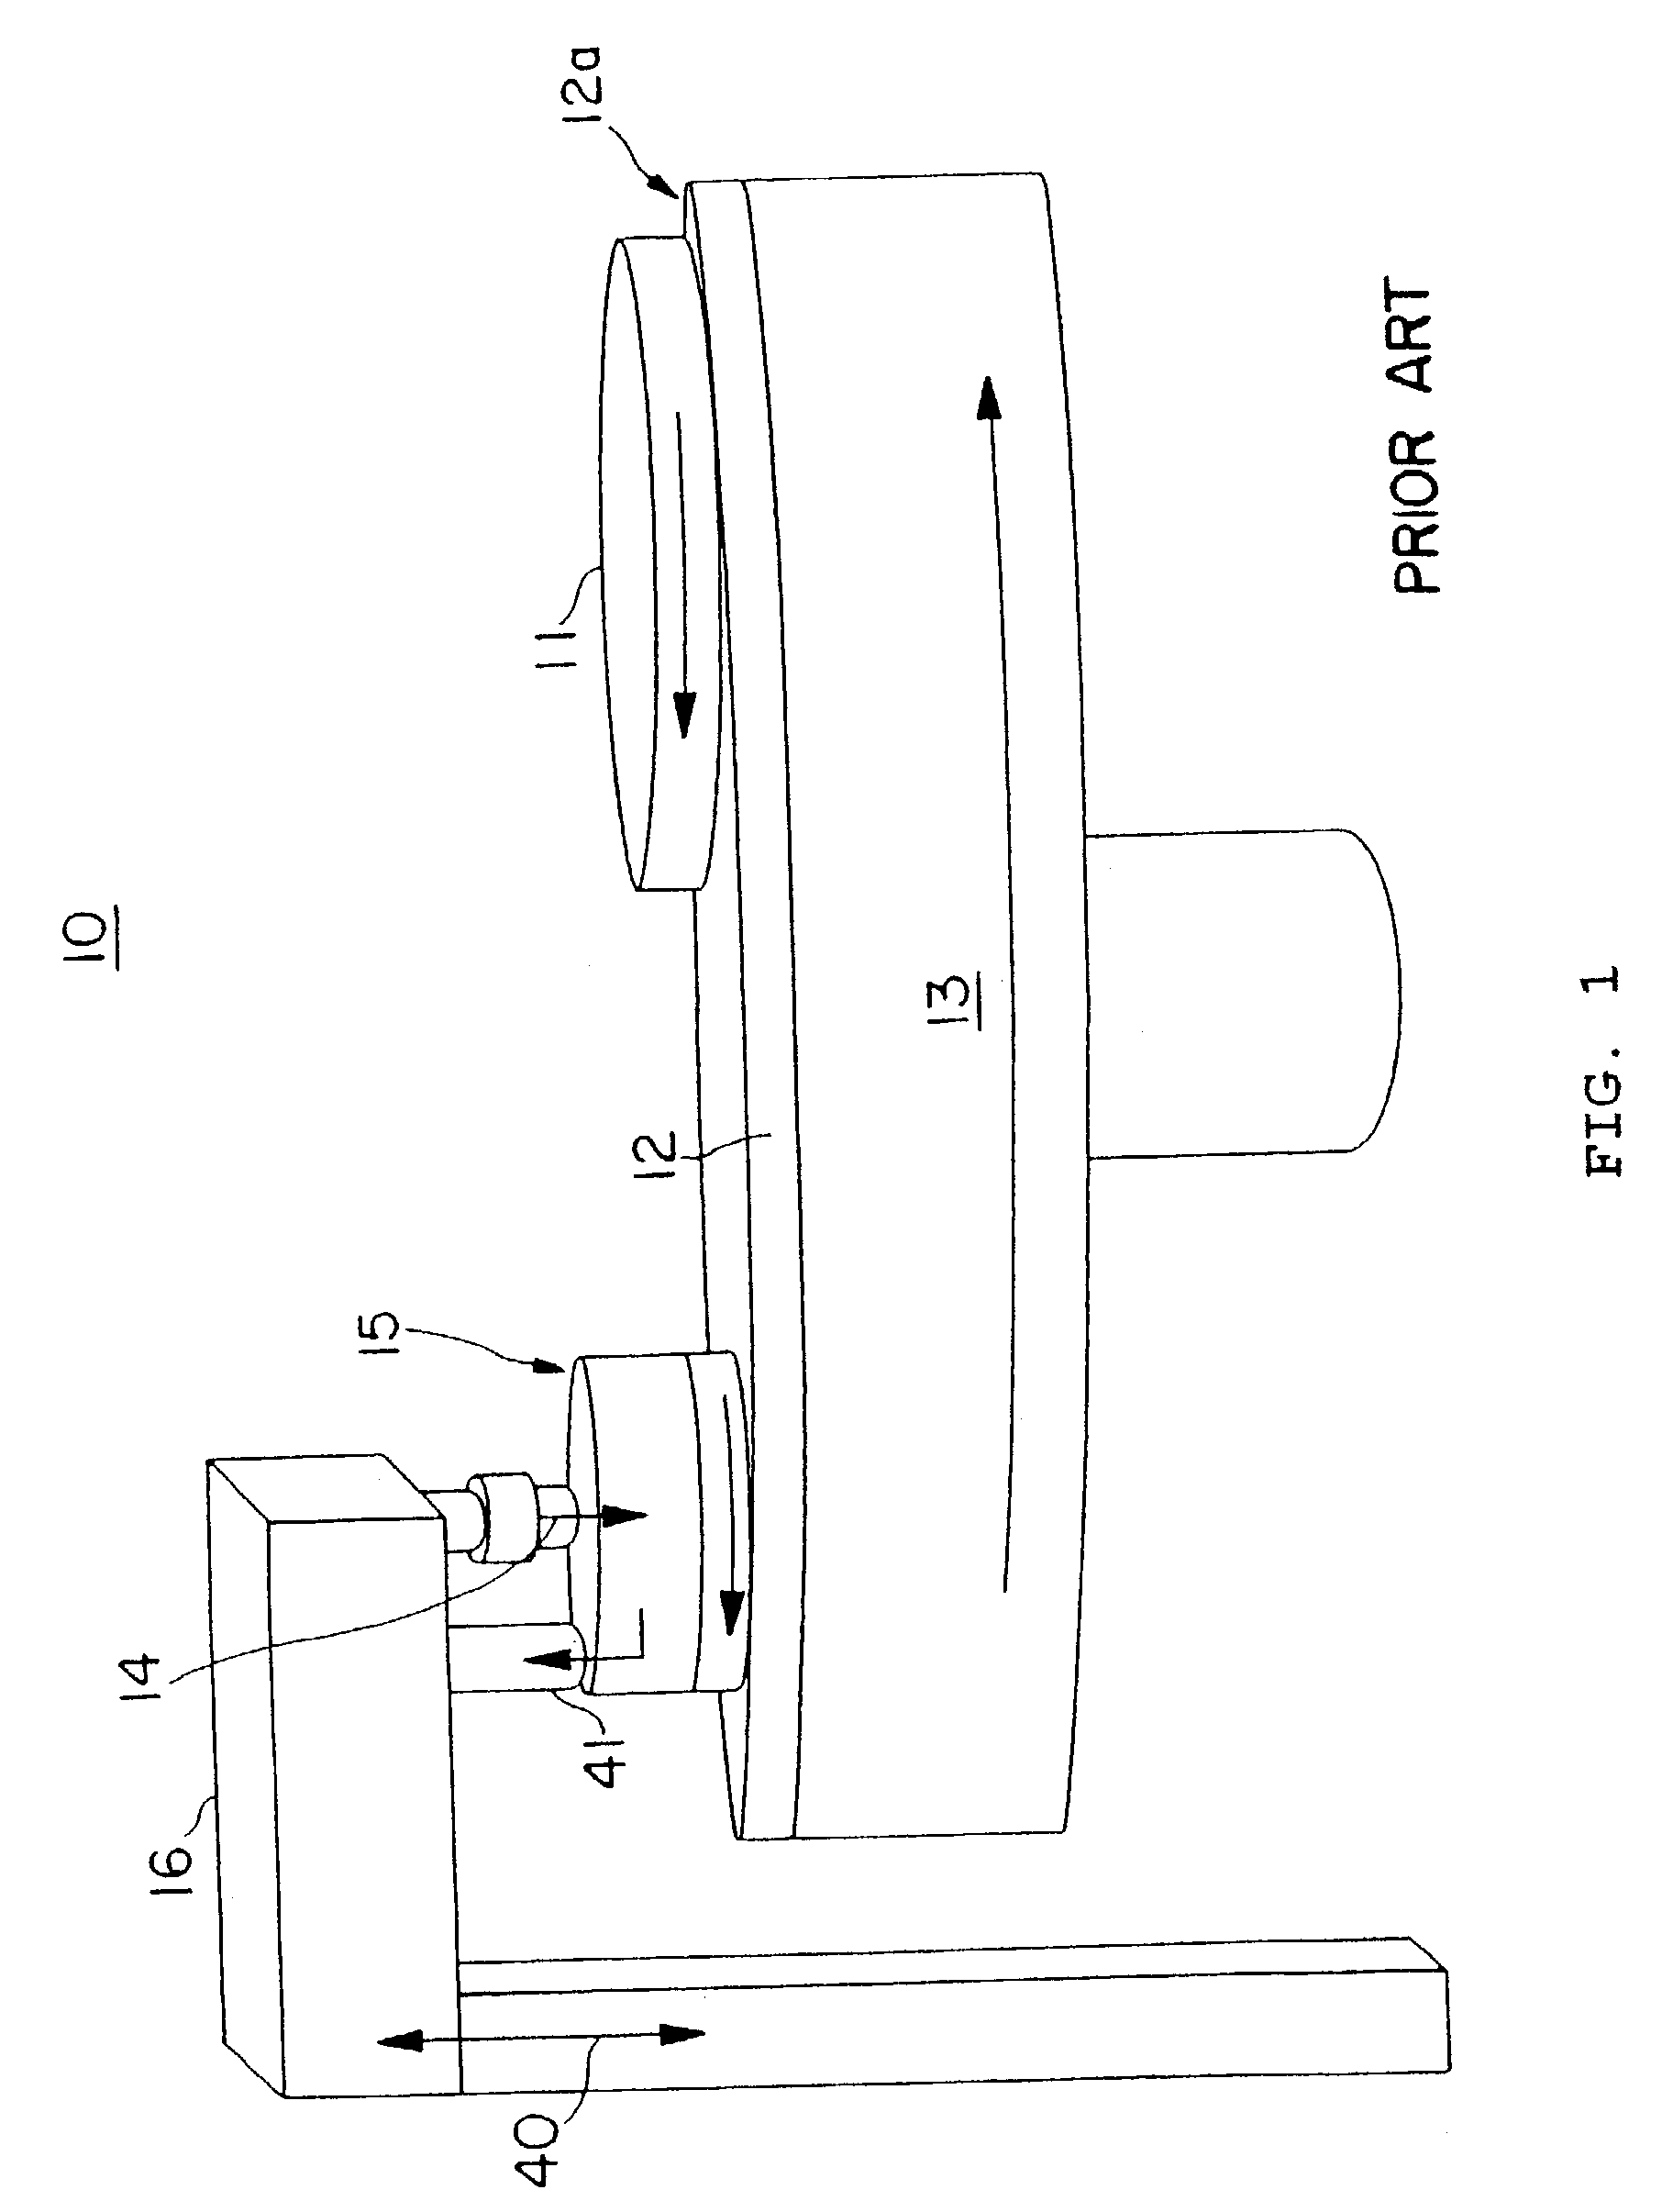 Vacuum-assisted pad conditioning system and method utilizing an apertured conditioning disk